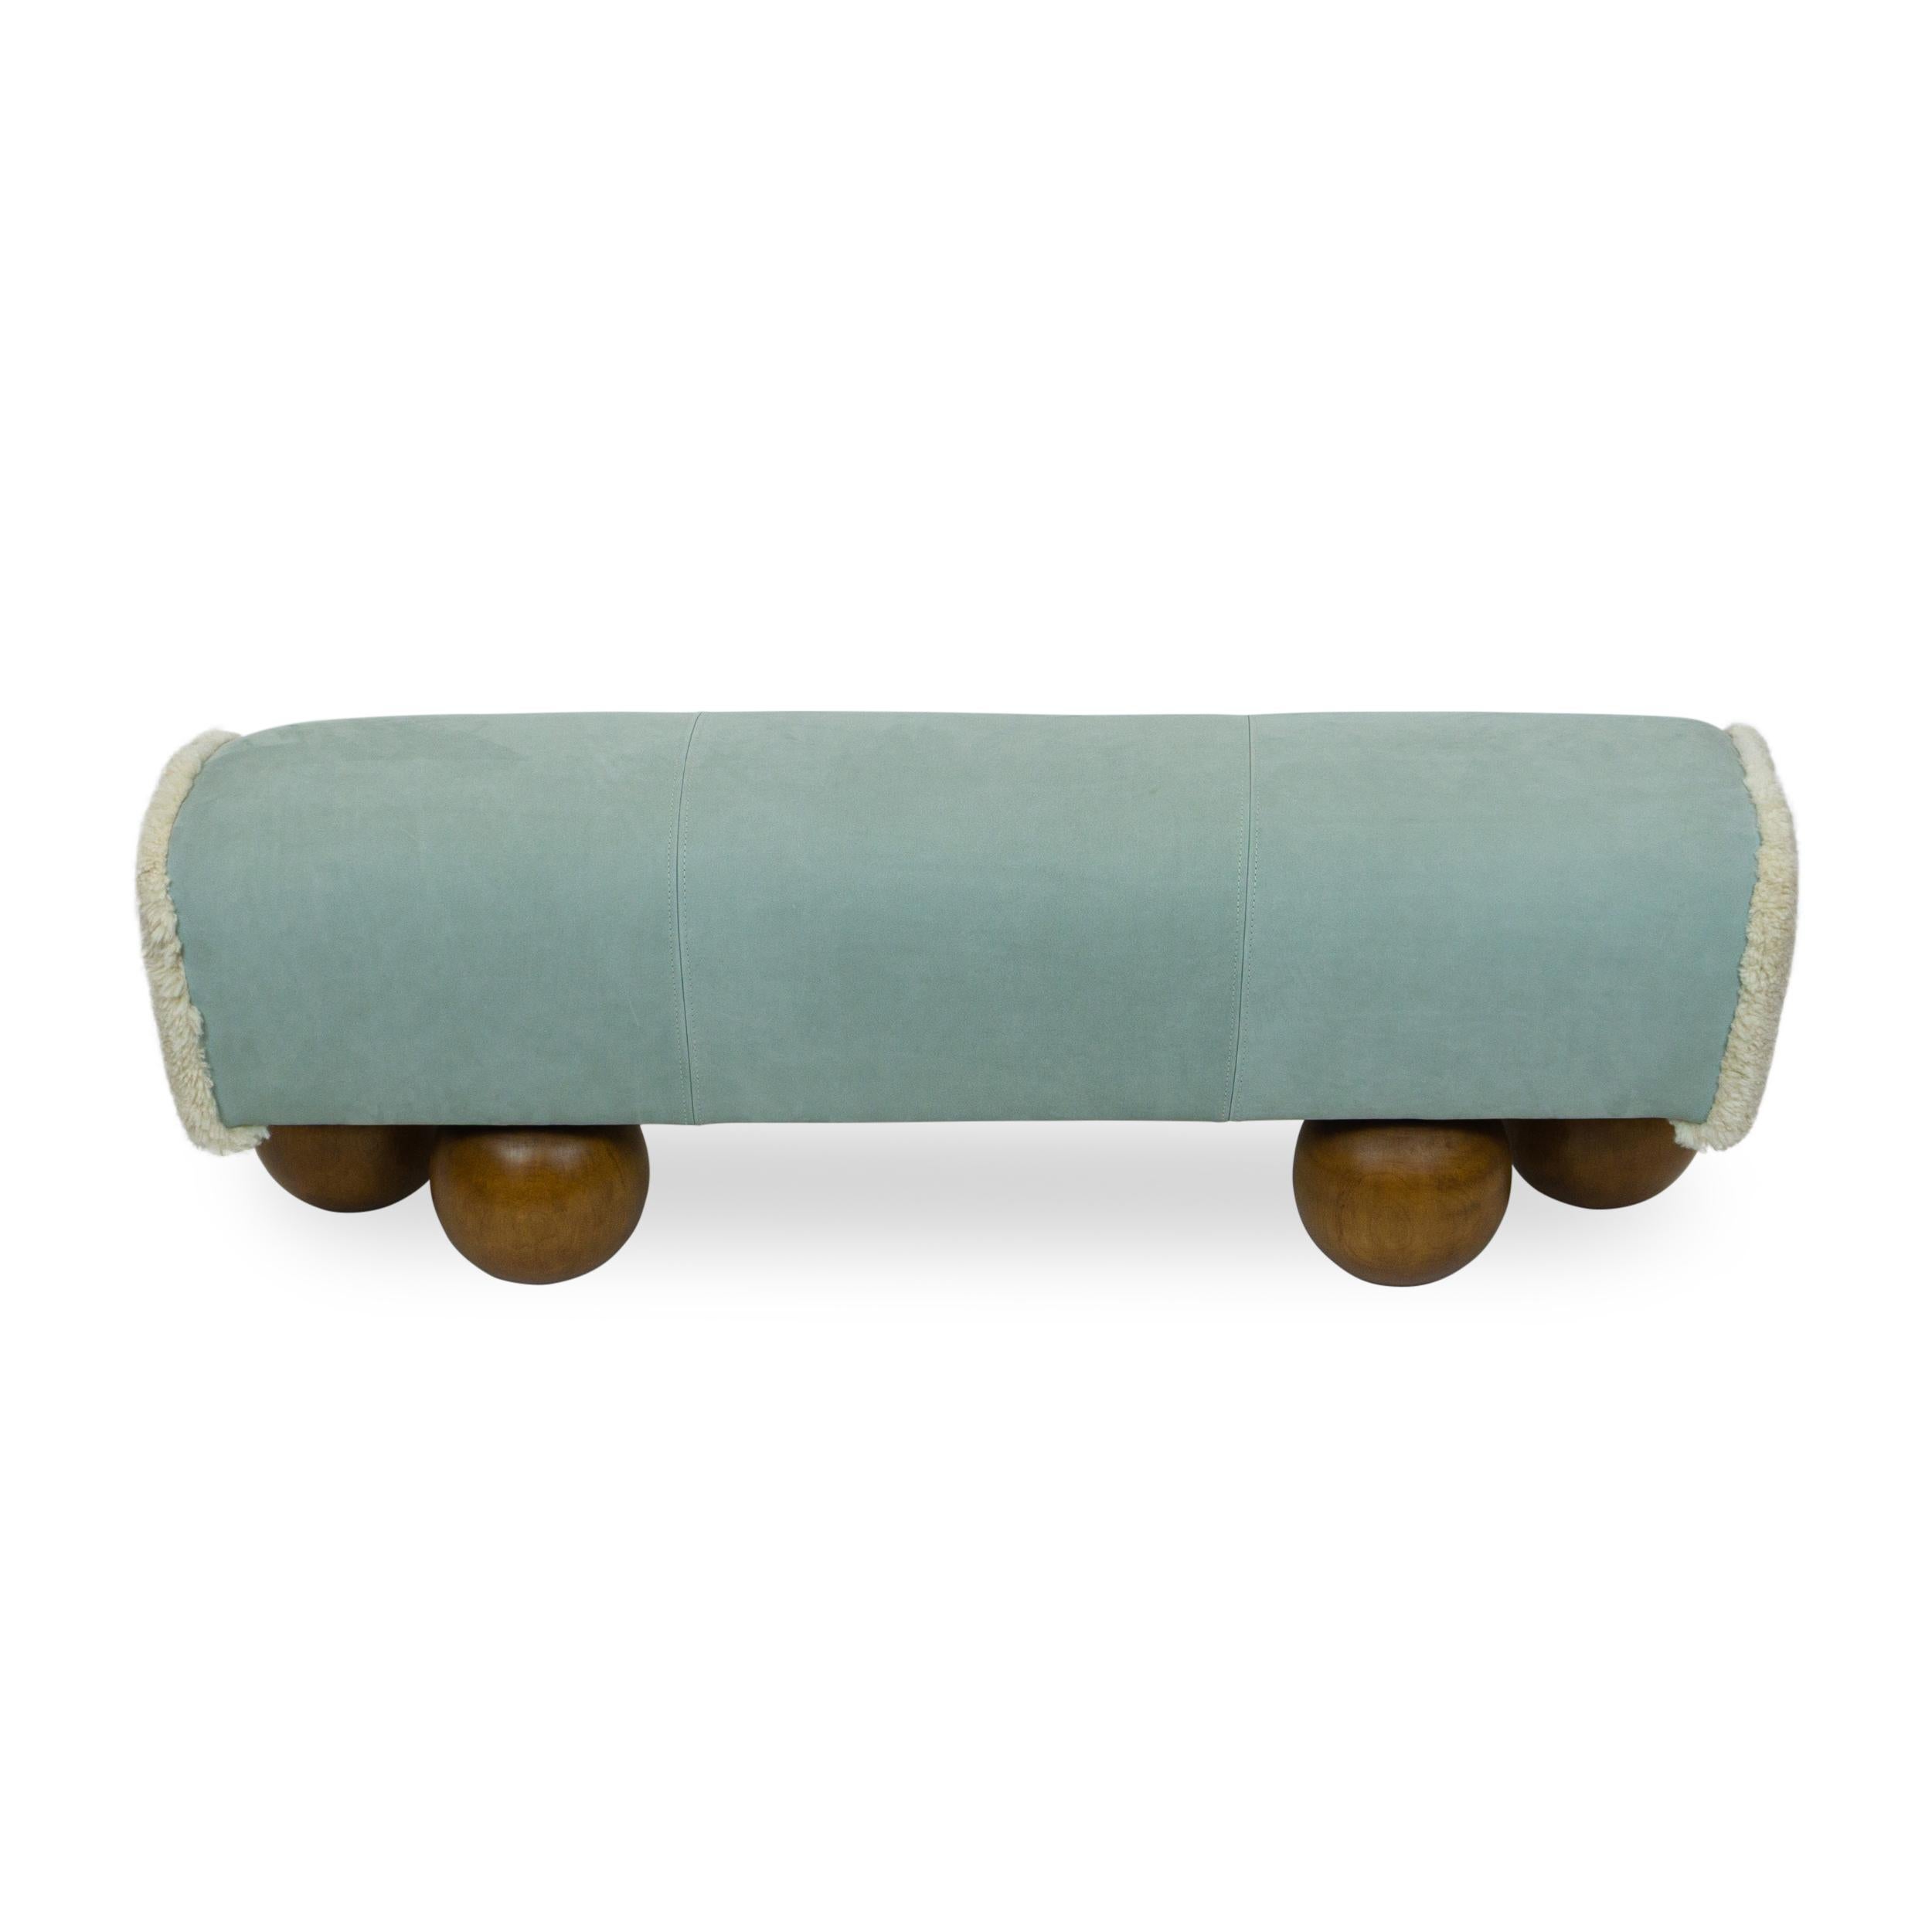 American Walnut Ball Foot Bench with Leather Saddle Shaped Seat, Customizable For Sale